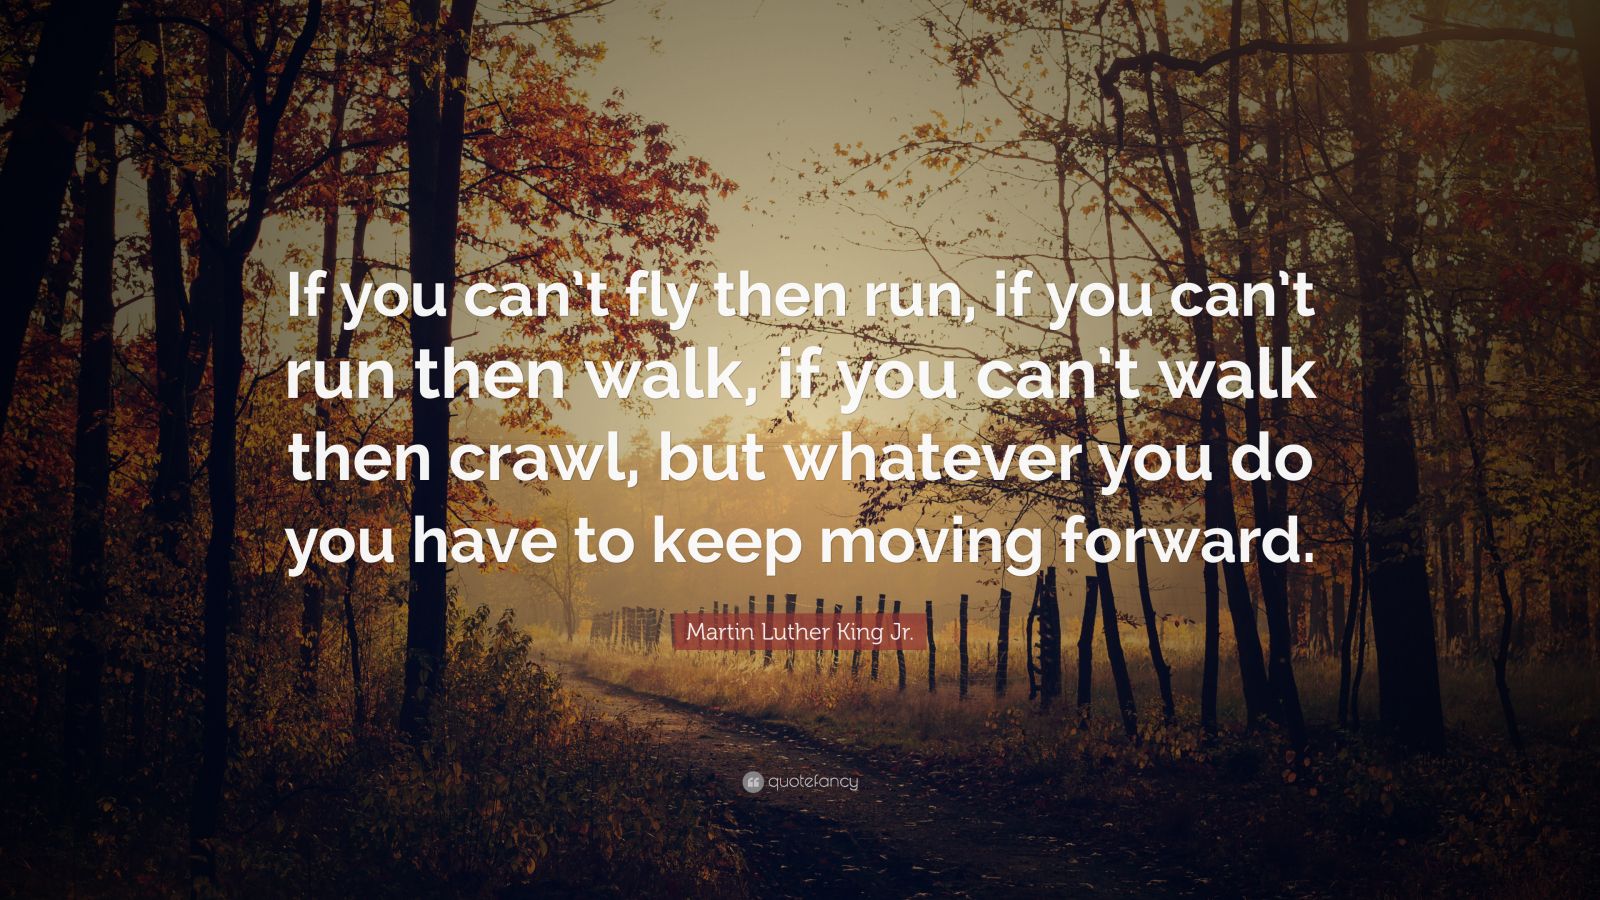 Martin Luther King Jr. Quote: “If you can’t fly then run, if you can’t